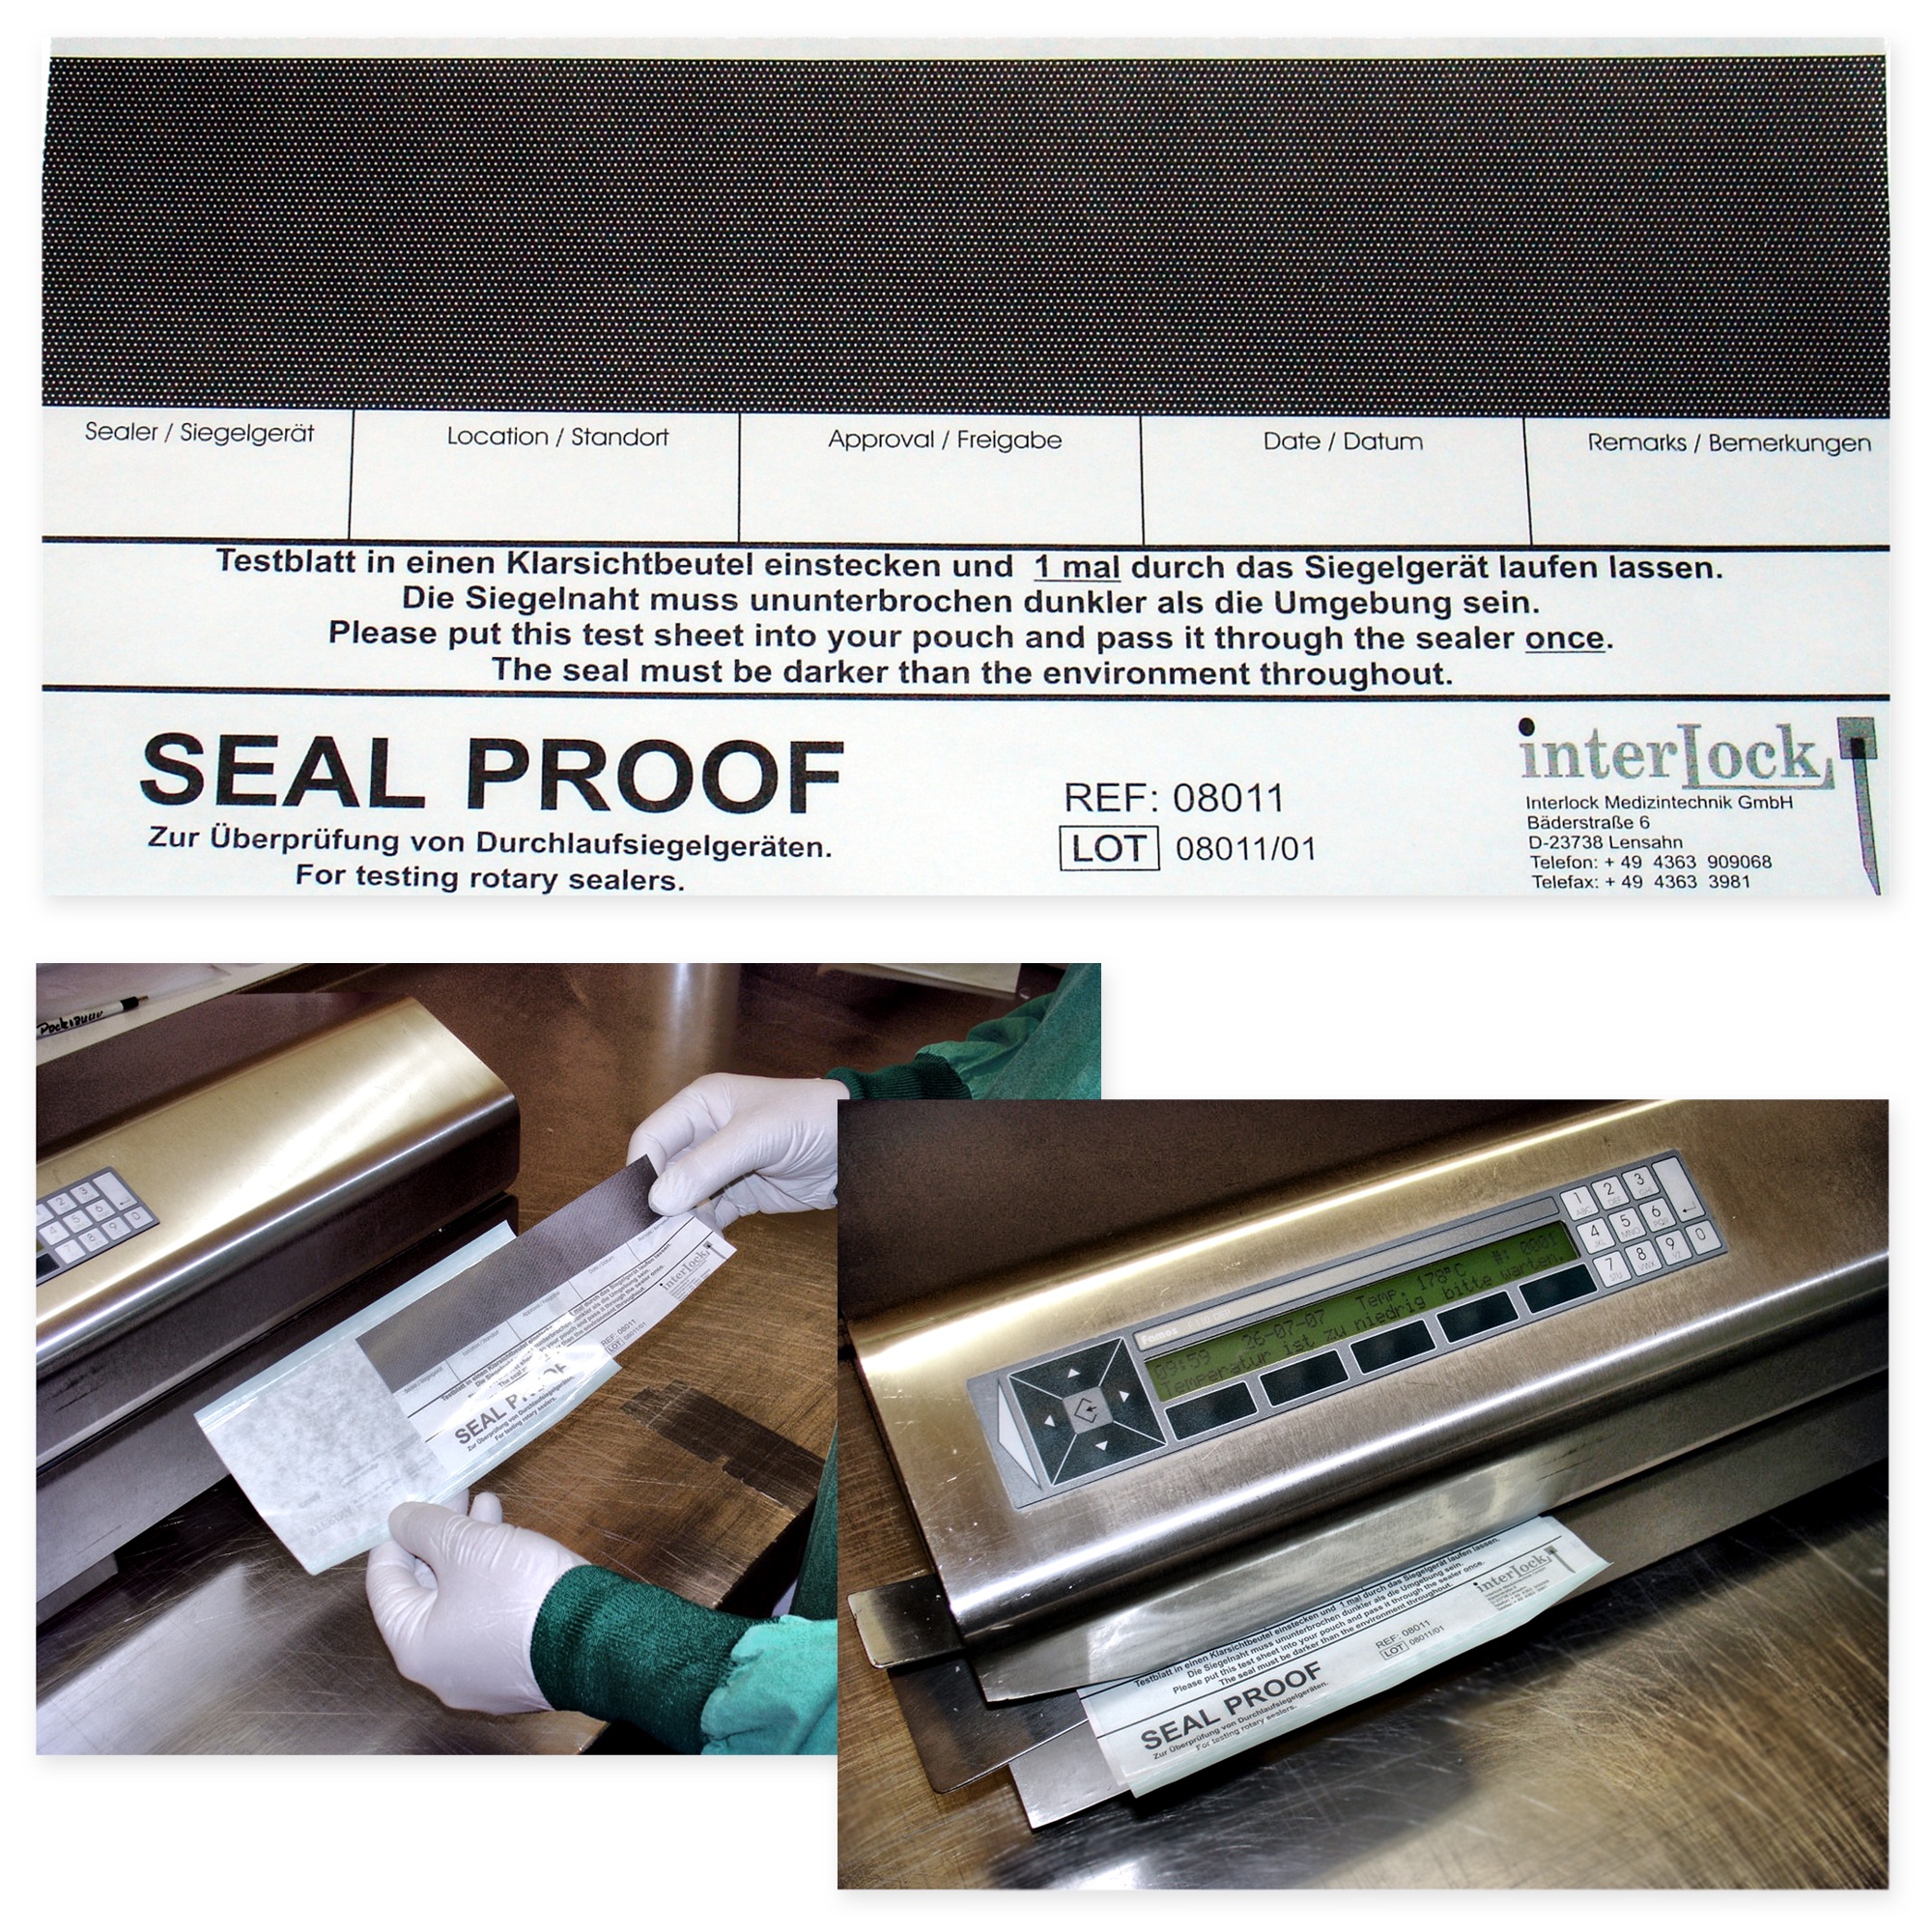 SEAL PROOF Image